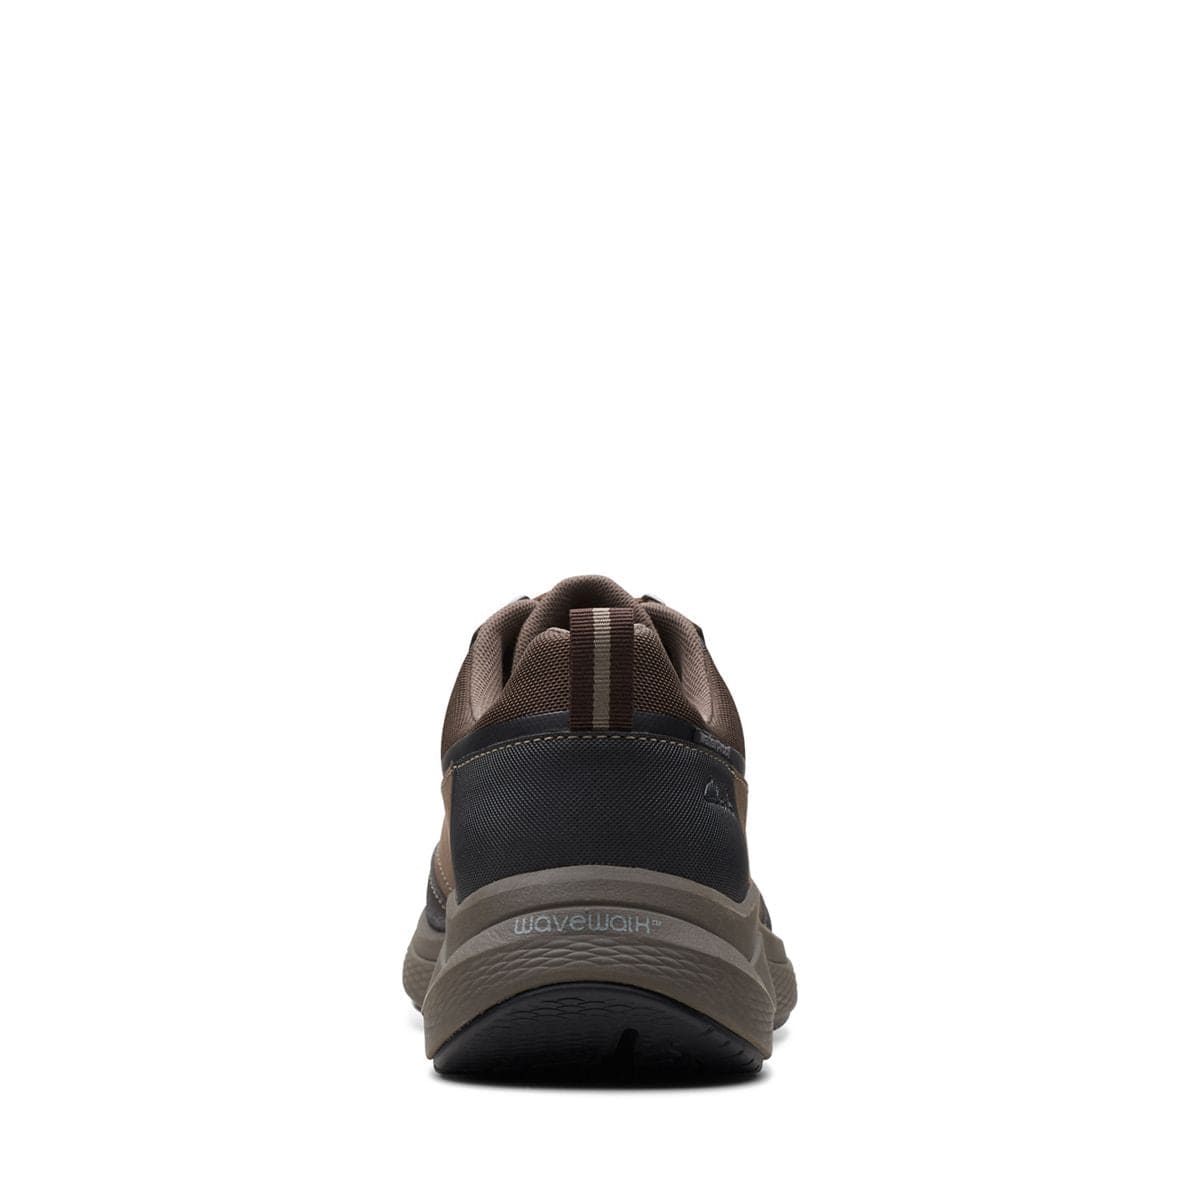 Clarks Shoes on X: The comfort your feet crave at the beginning